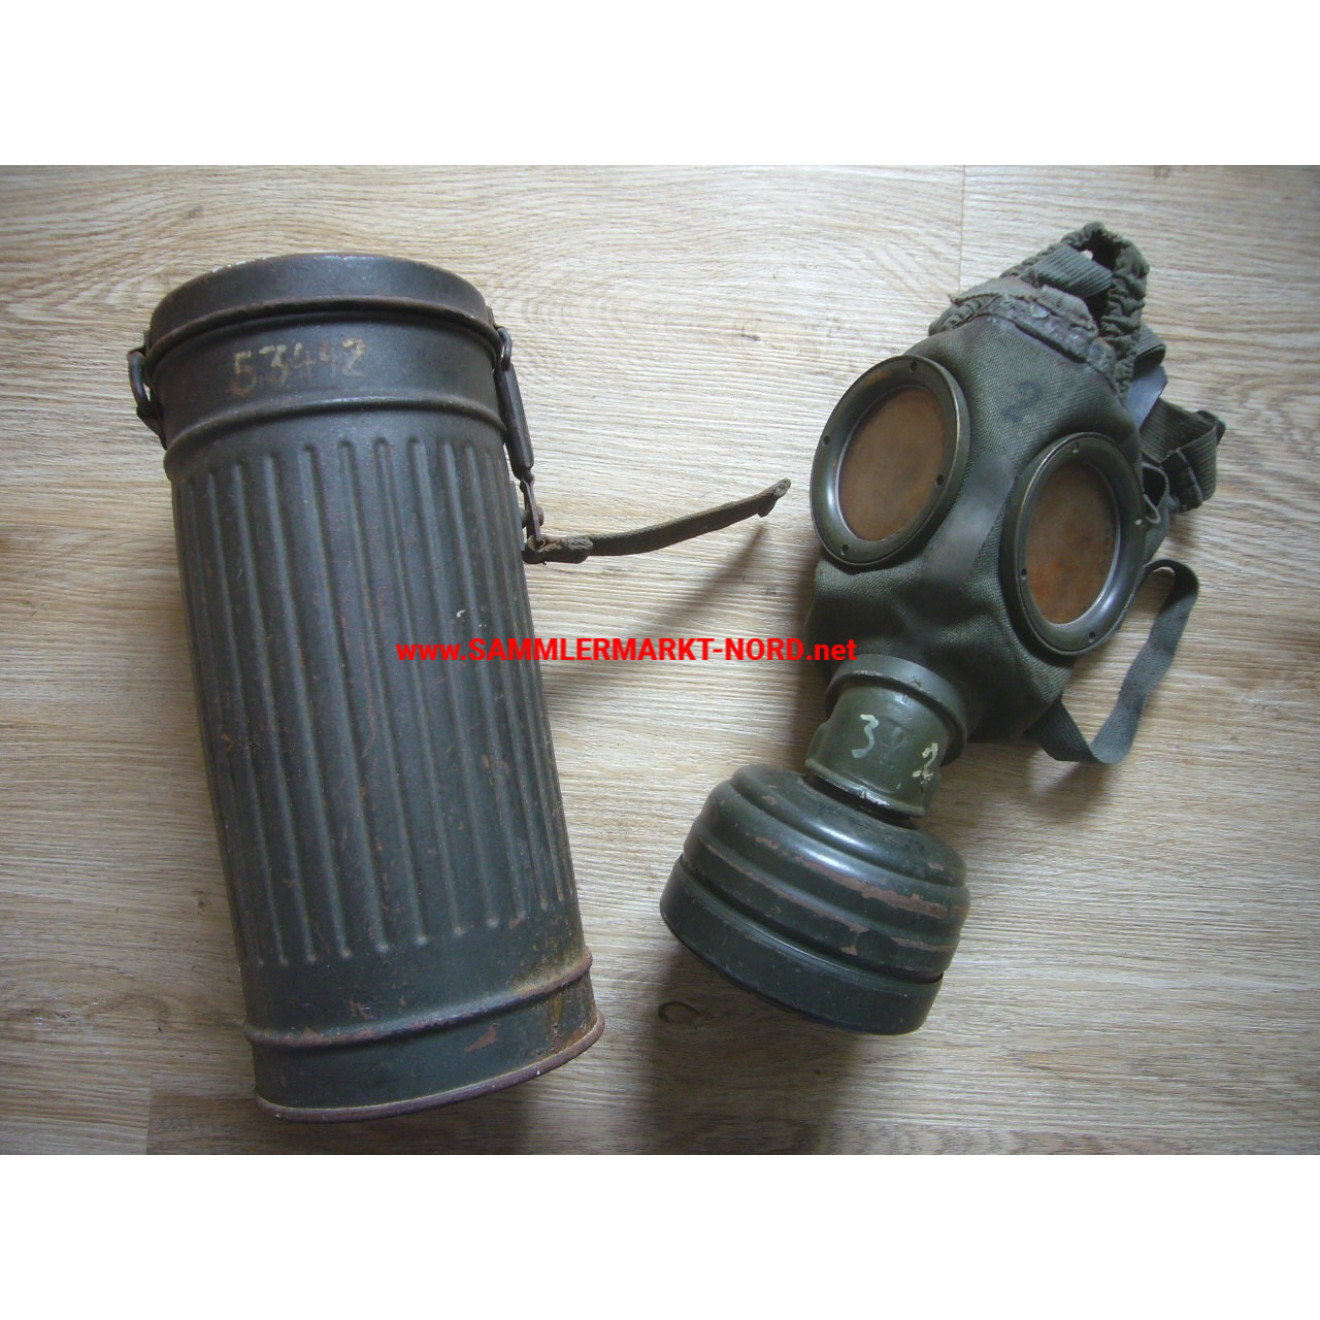 Wehrmacht gas mask with filter & gas mask can 1940